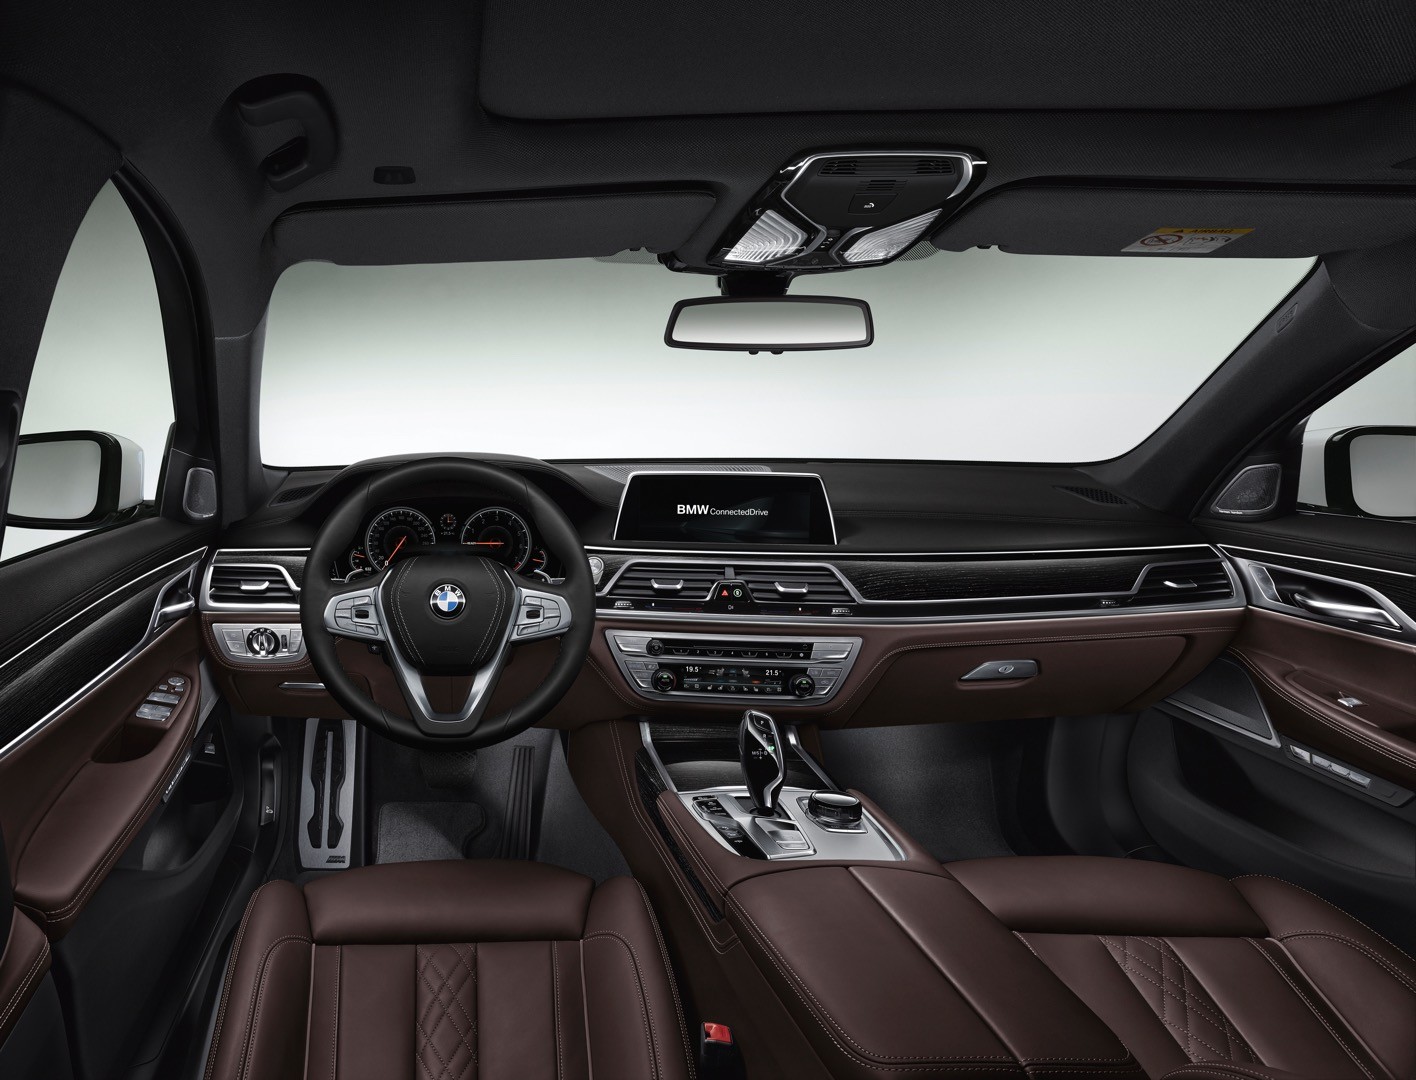 2016-bmw-7-series-finally-officially-unveiled-the-good-stuffs-inside-photo-gallery_116.jpg